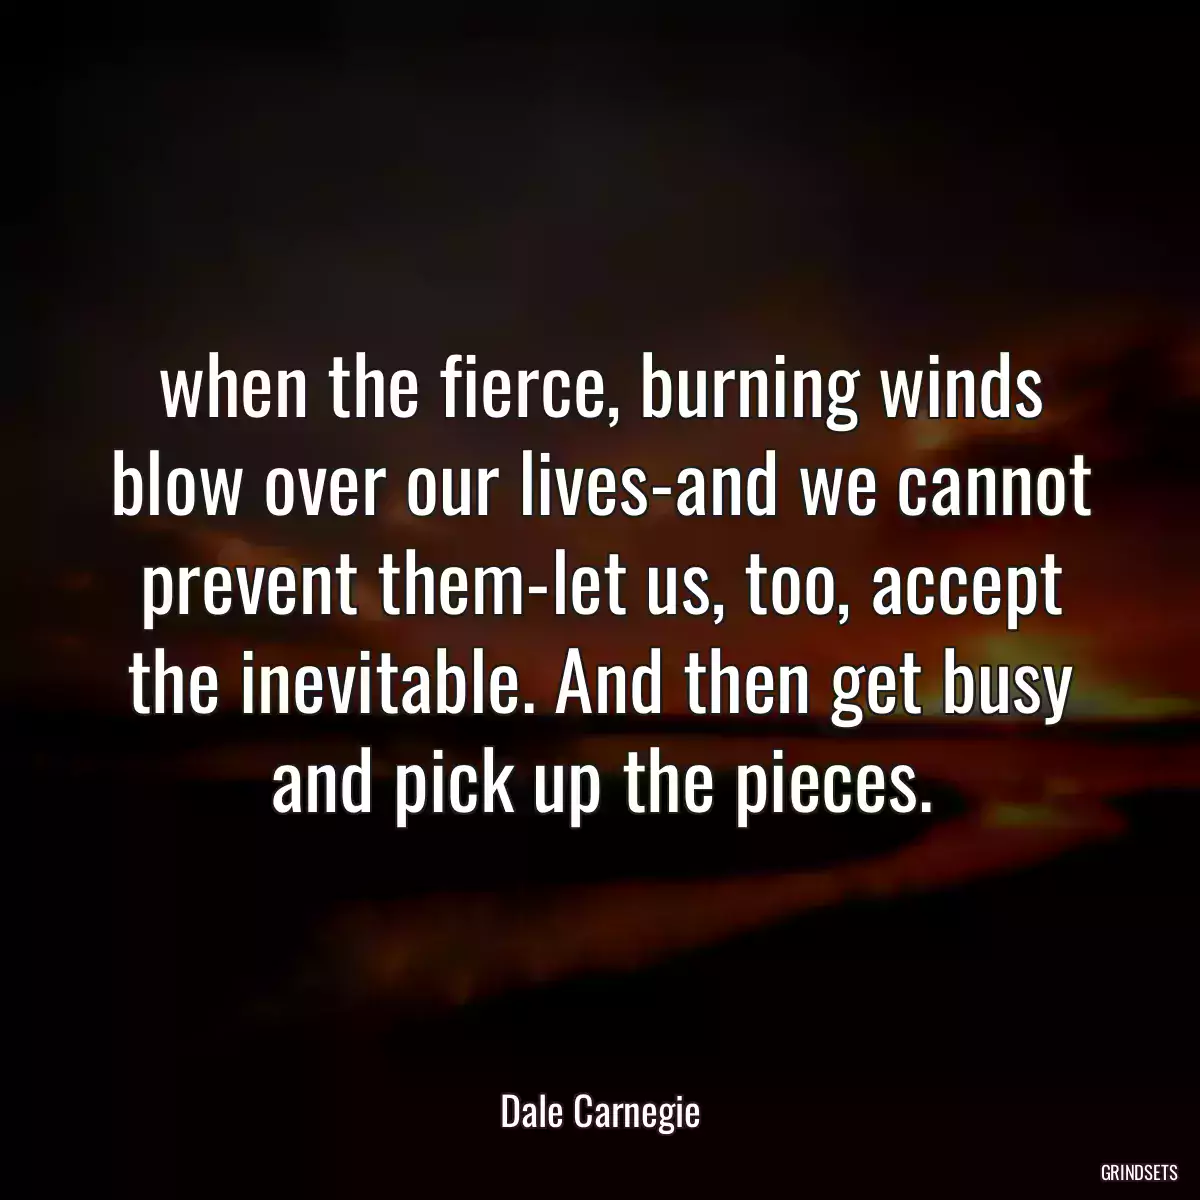 when the fierce, burning winds blow over our lives-and we cannot prevent them-let us, too, accept the inevitable. And then get busy and pick up the pieces.